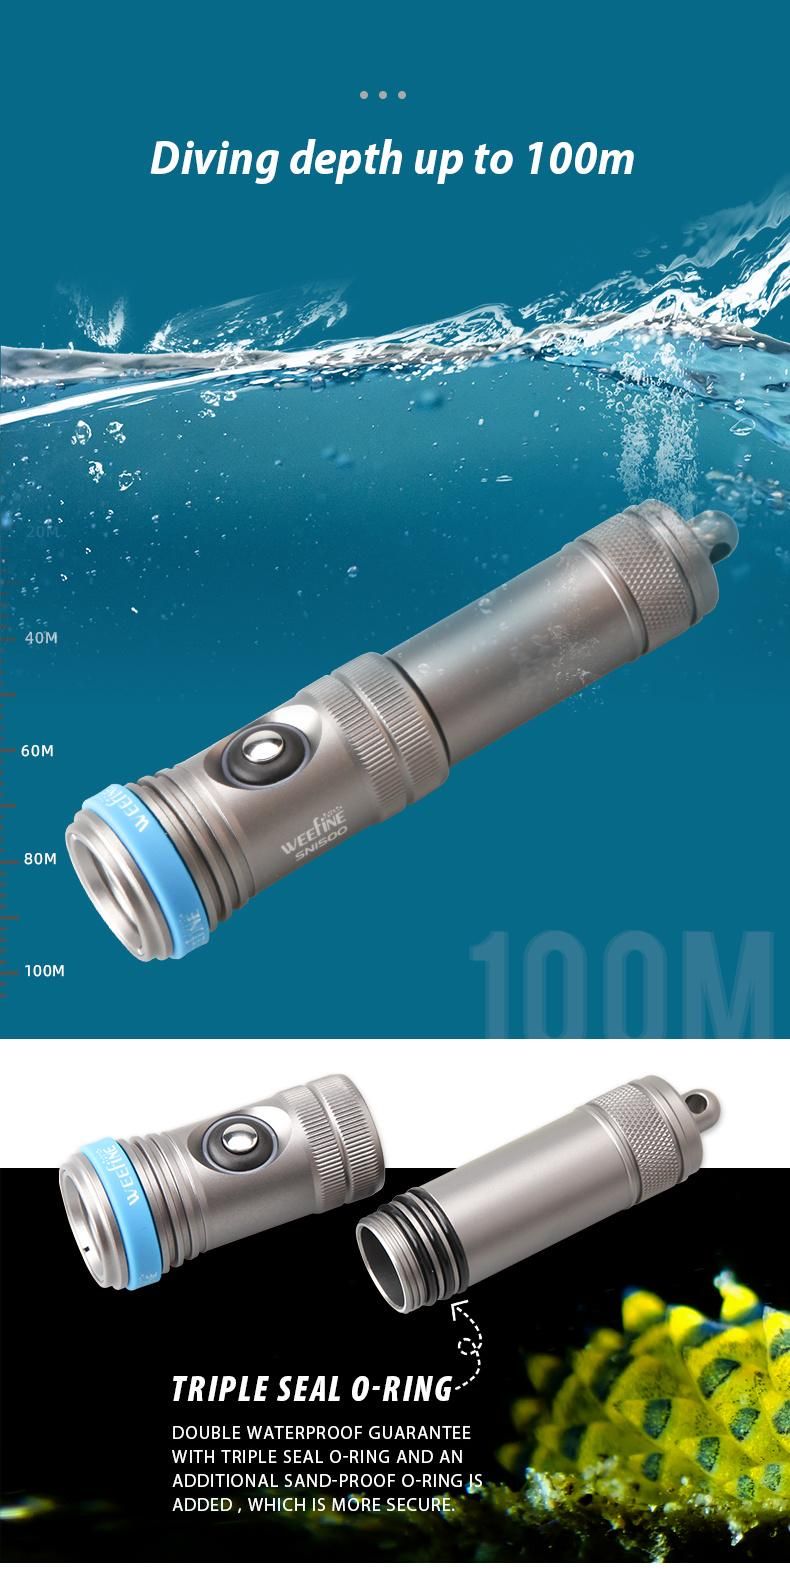 Weefine Patent Smart Aesthetic Dive Torch with Patent Design Shooting Strobe Mode